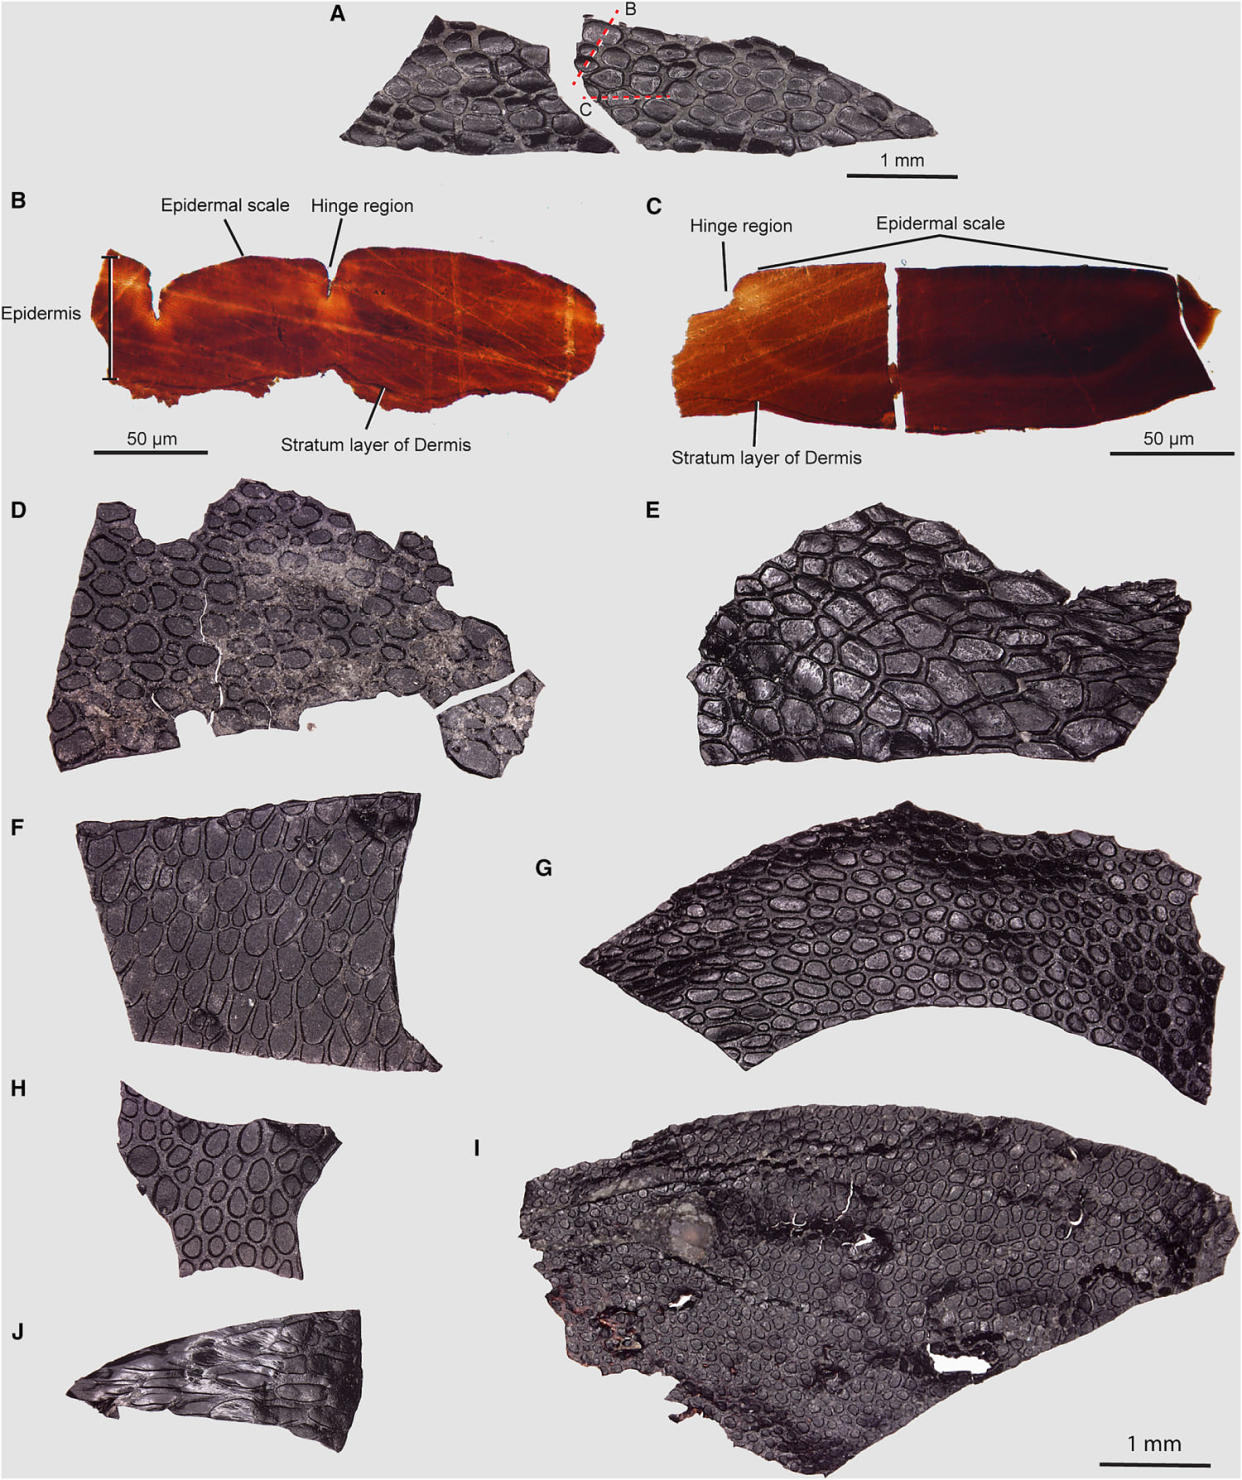 Three-dimensional skin cast and compression fossils from unknown amniotes. (Mooney et al. / Current Biology)